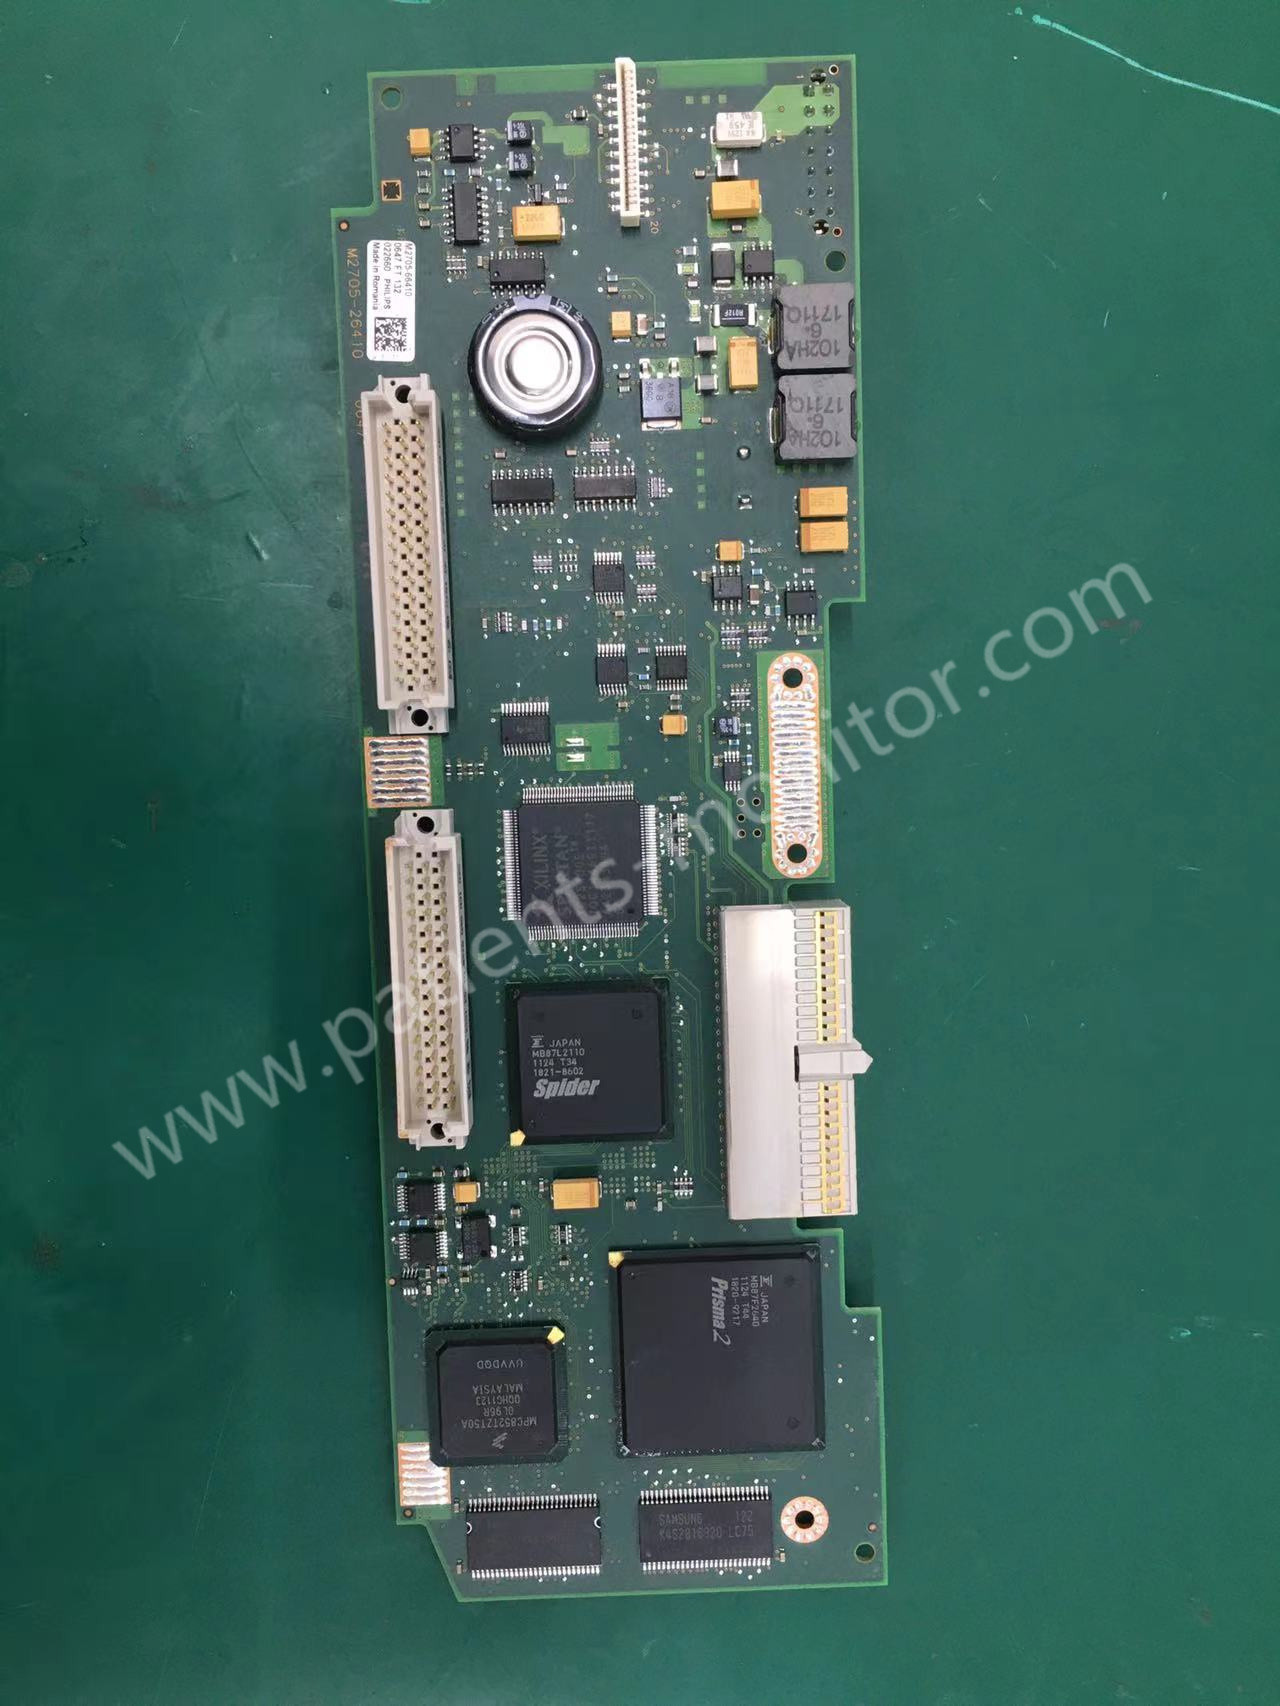  Philips FM20 Fetal Monitor Mainboard Mother Board Main CPU Board M2705-66410 M2703-66510 0647 FT132 Manufactures